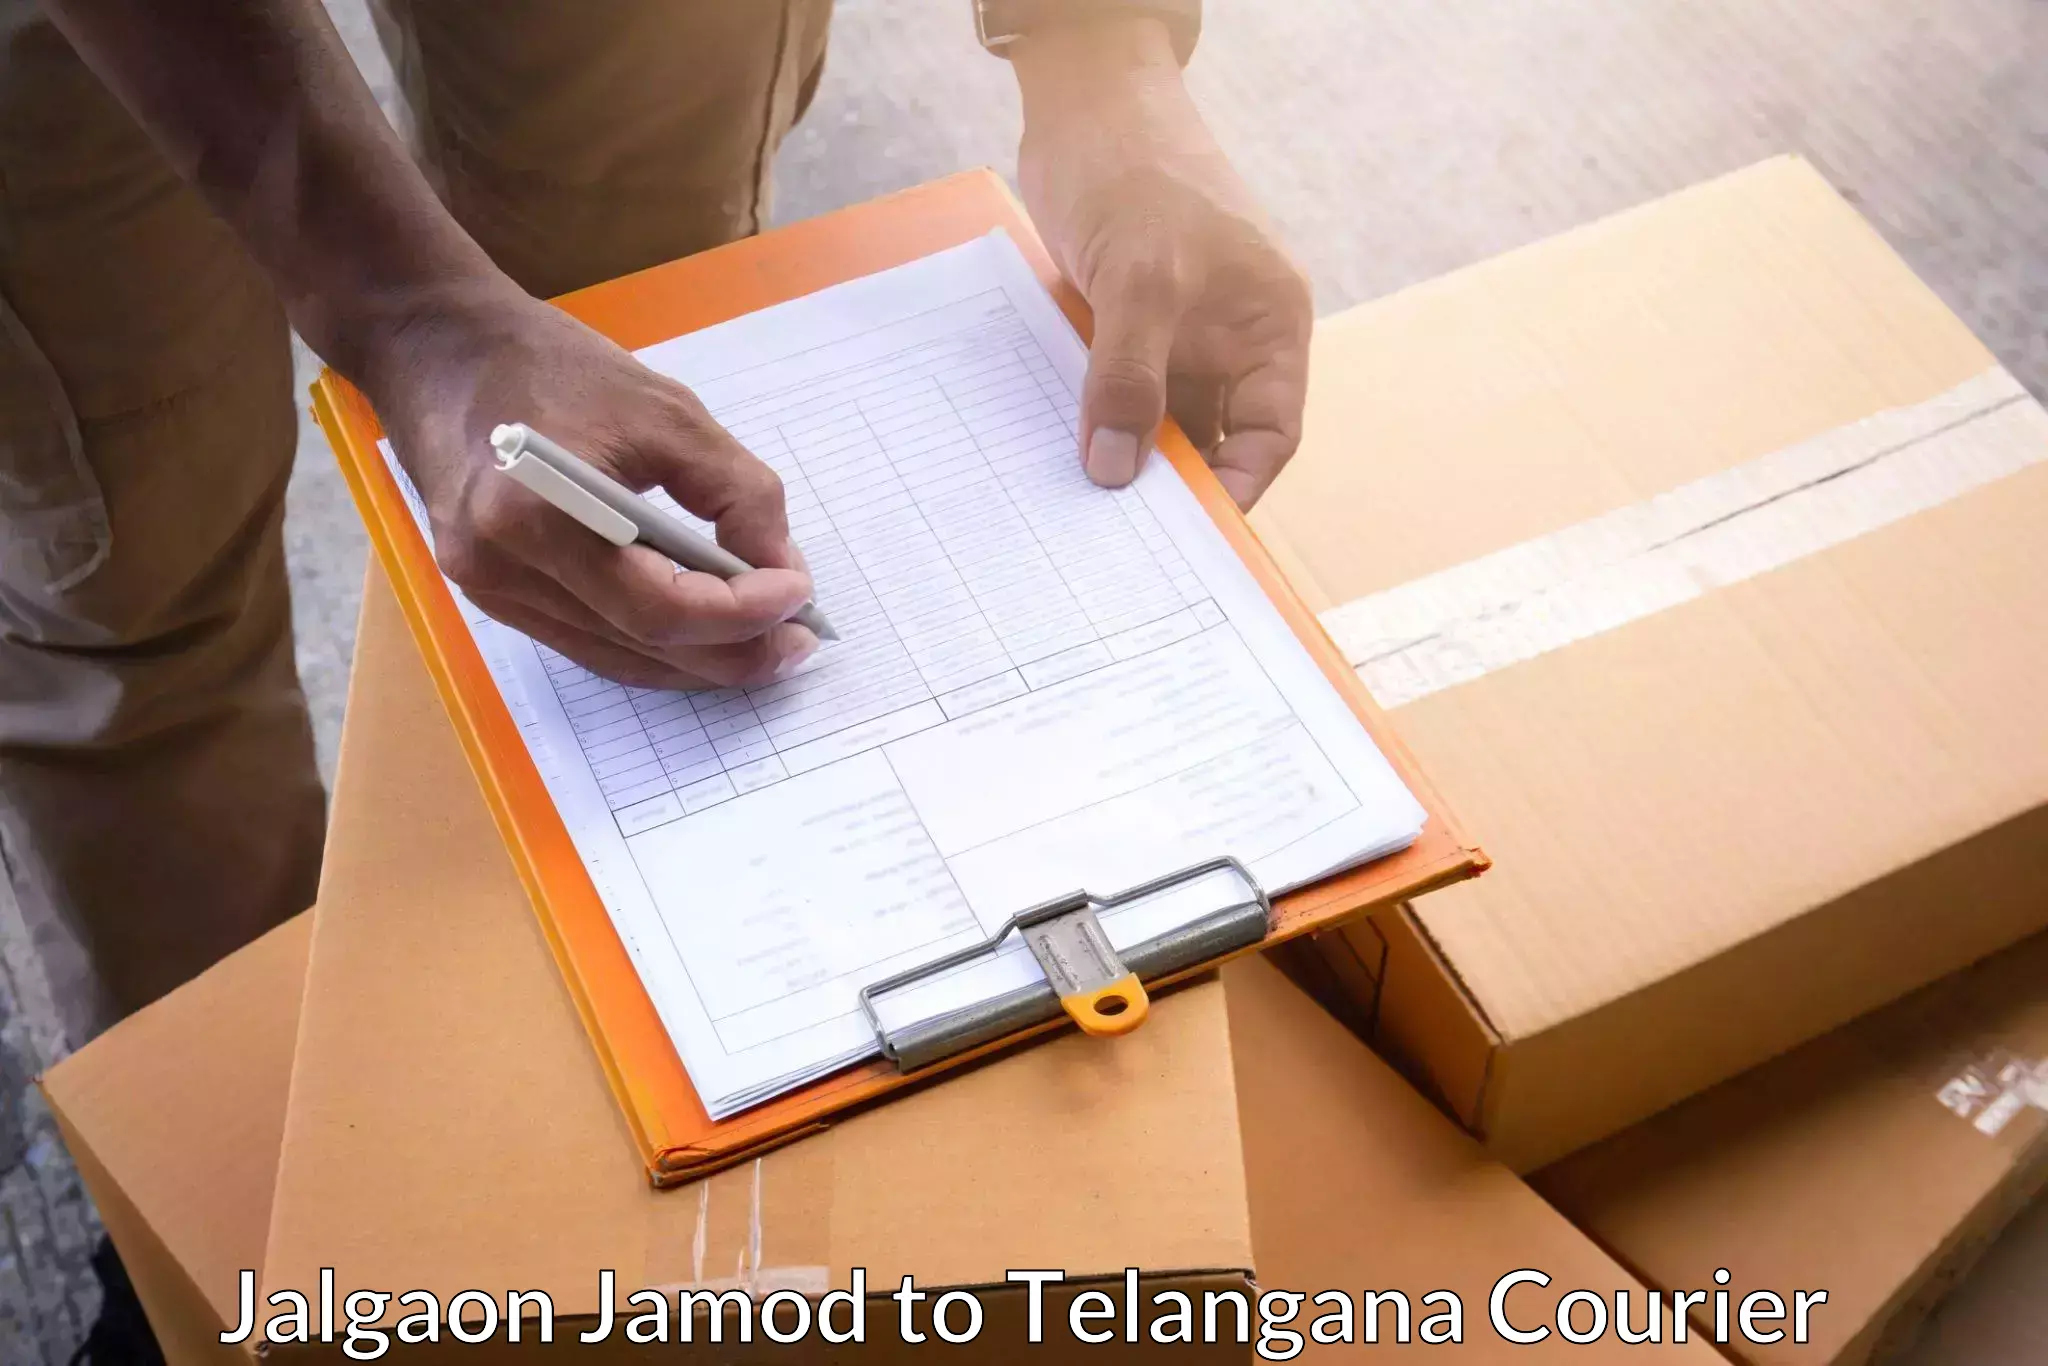 Expedited parcel delivery in Jalgaon Jamod to Chintoor